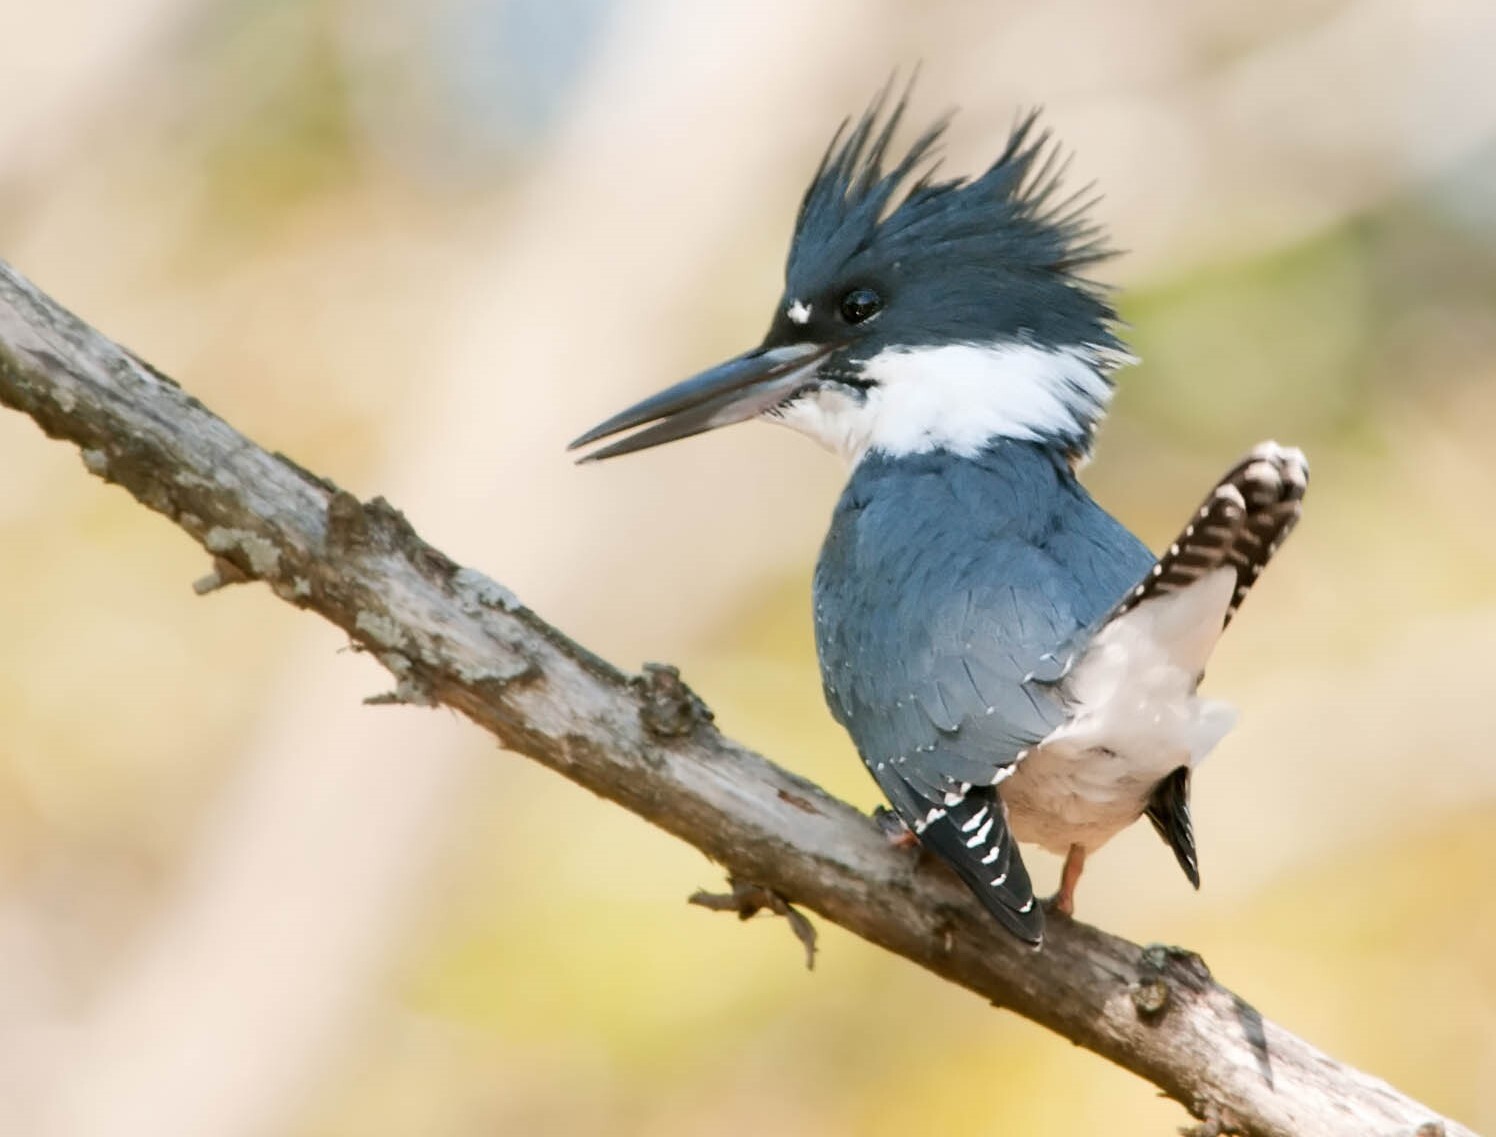 Turtle Pond is one of the best spots in the park to find a Belted Kingfisher.  <a href="https://www.flickr.com/photos/puttefin/5065886781/" target="_blank">Photo</a>: Kelly Colgan Azar/<a href="https://creativecommons.org/licenses/by-nd/2.0/" target="_blank" >CC BY-ND 2.0</a>